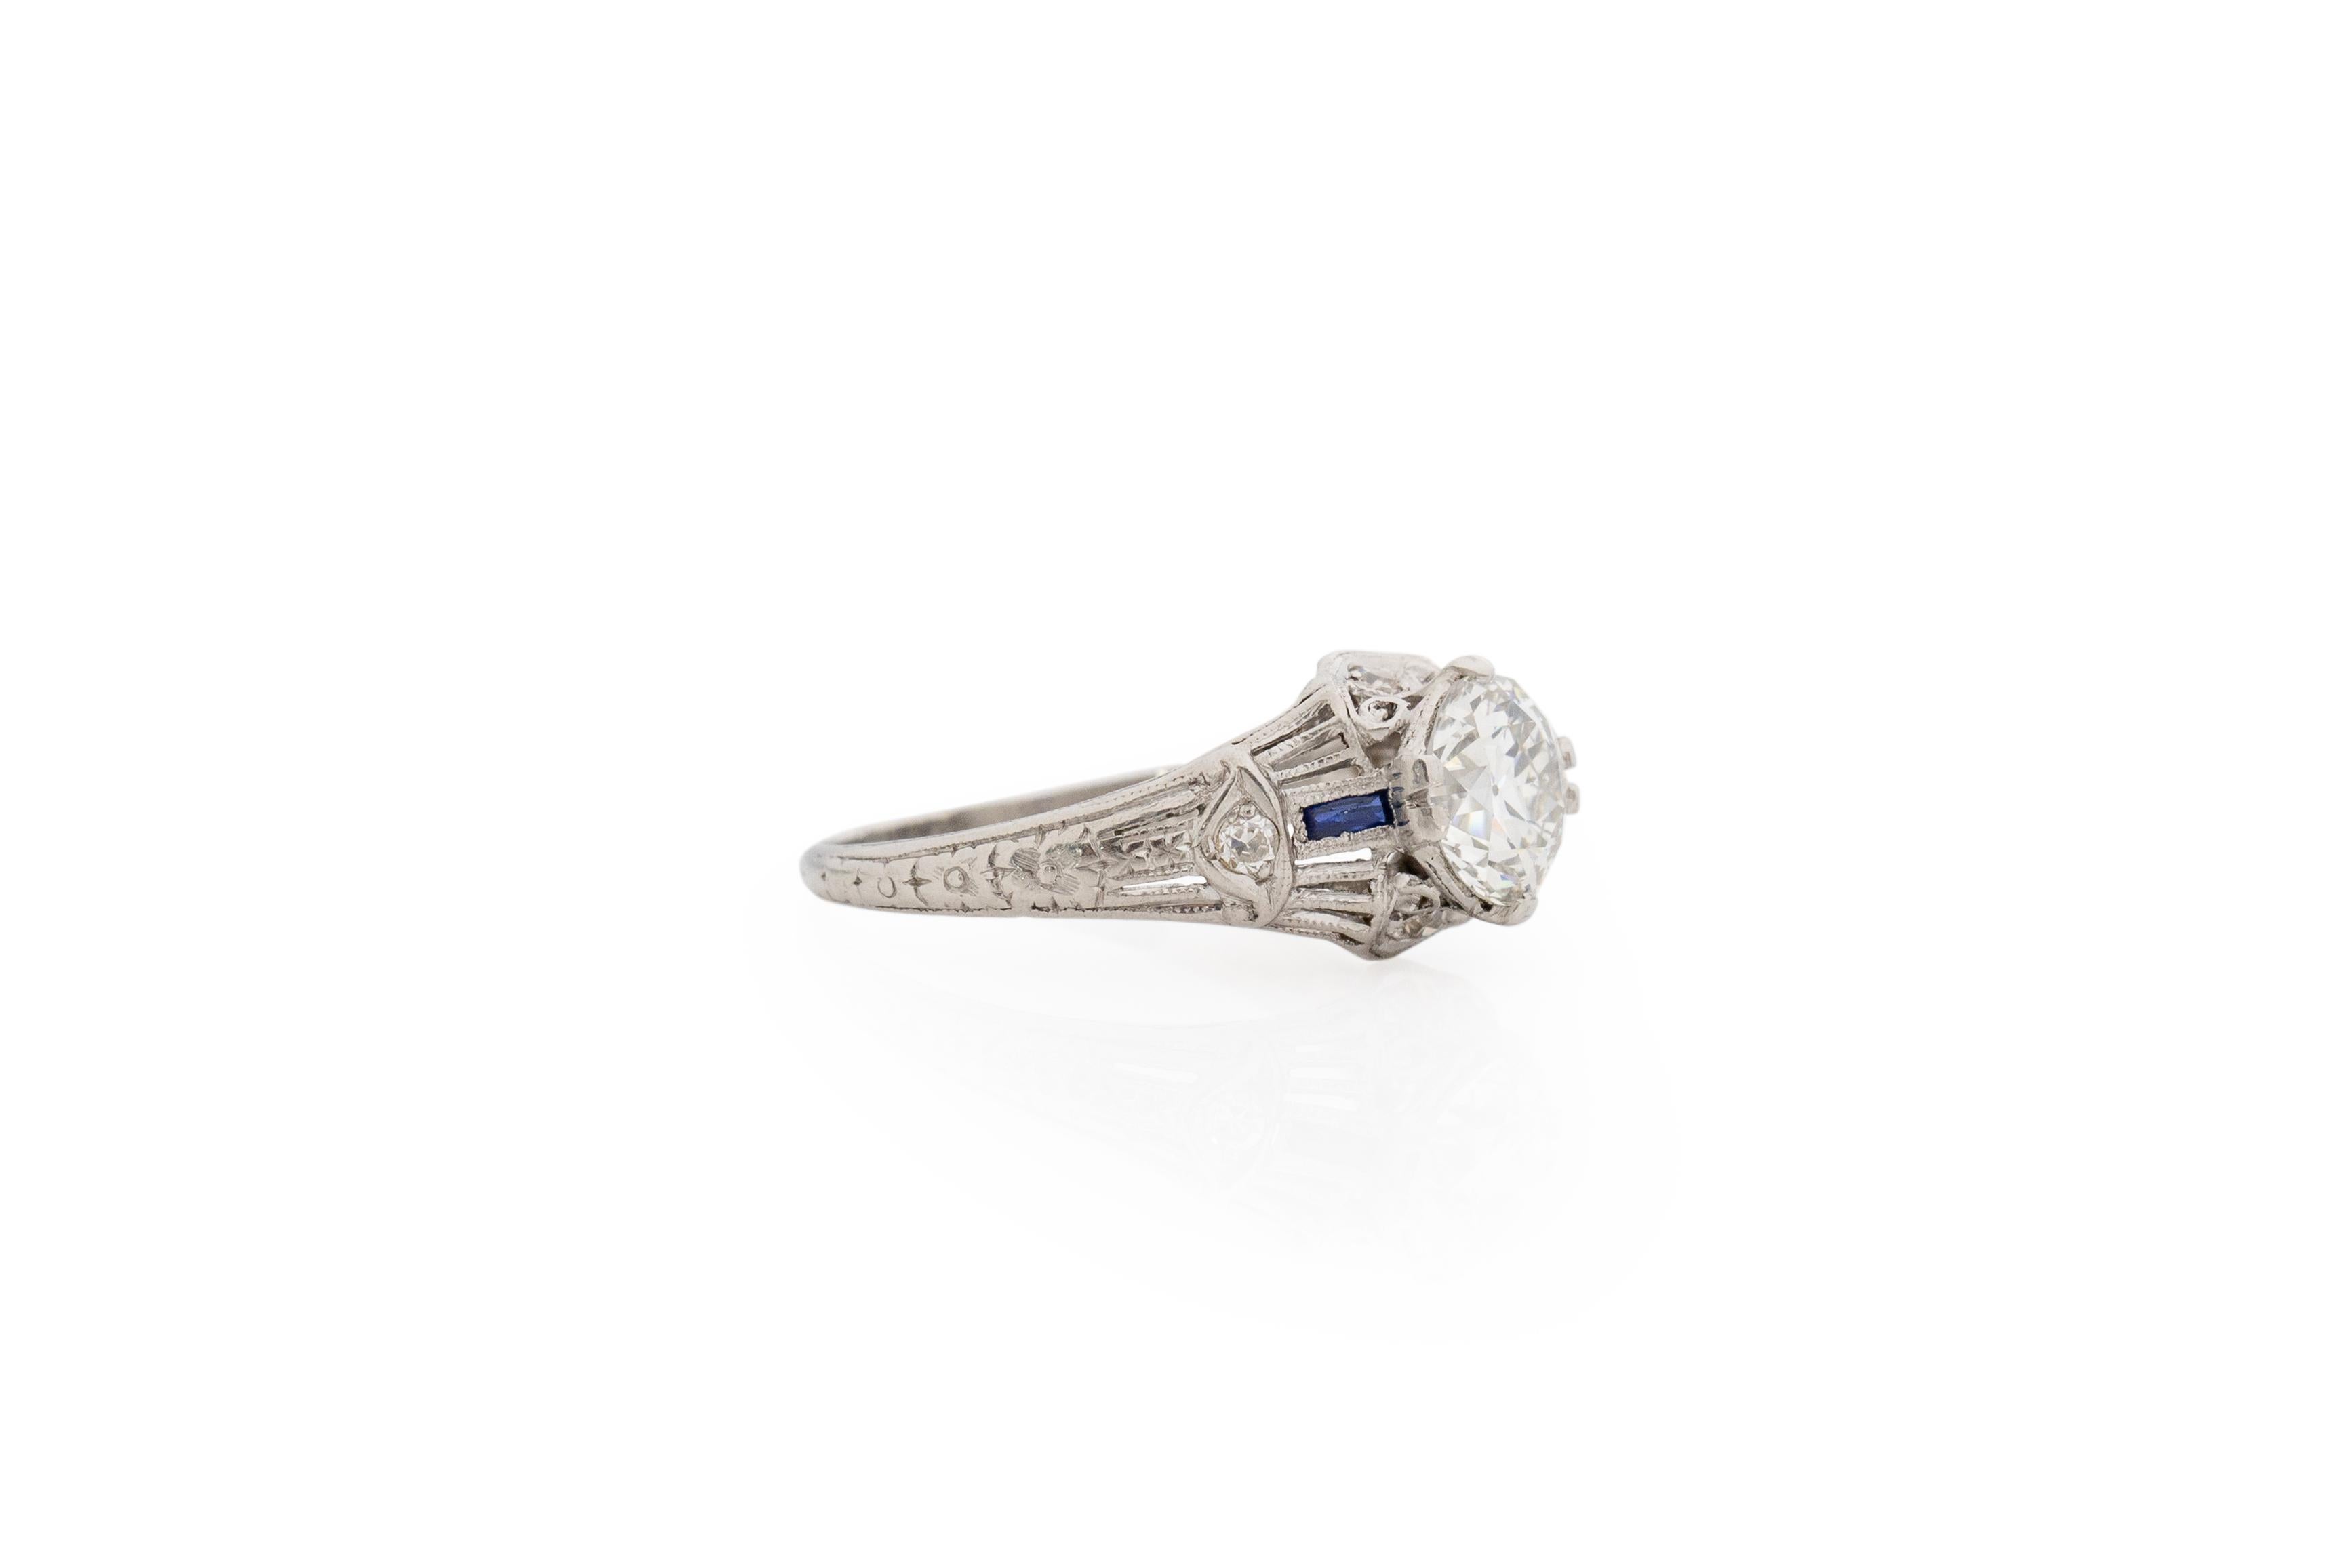 Ring Size: 6.5
Metal Type: Platinum [Hallmarked, and Tested]
Weight: 3.3 grams

Center Diamond Details:
GIA REPORT #: 2211528005
Weight: 1.28 carat
Cut: Old European brilliant
Color: I
Clarity: VS2
Measurements: 7.02mm x 6.77mm x 4.39

Side Stone